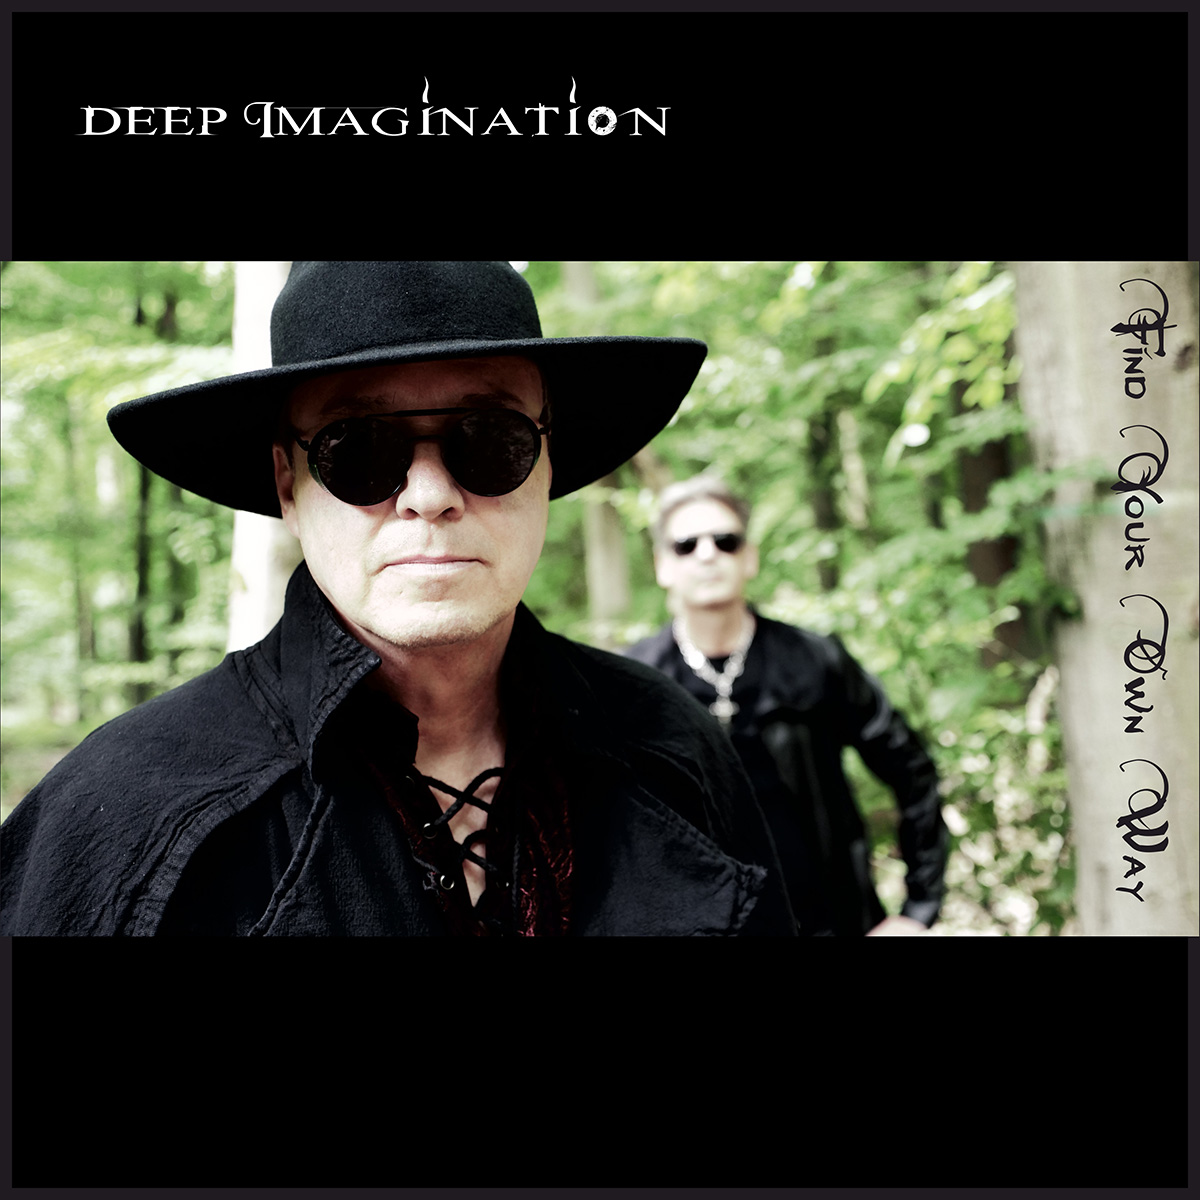 15 Questions Interview with Deep Imagination